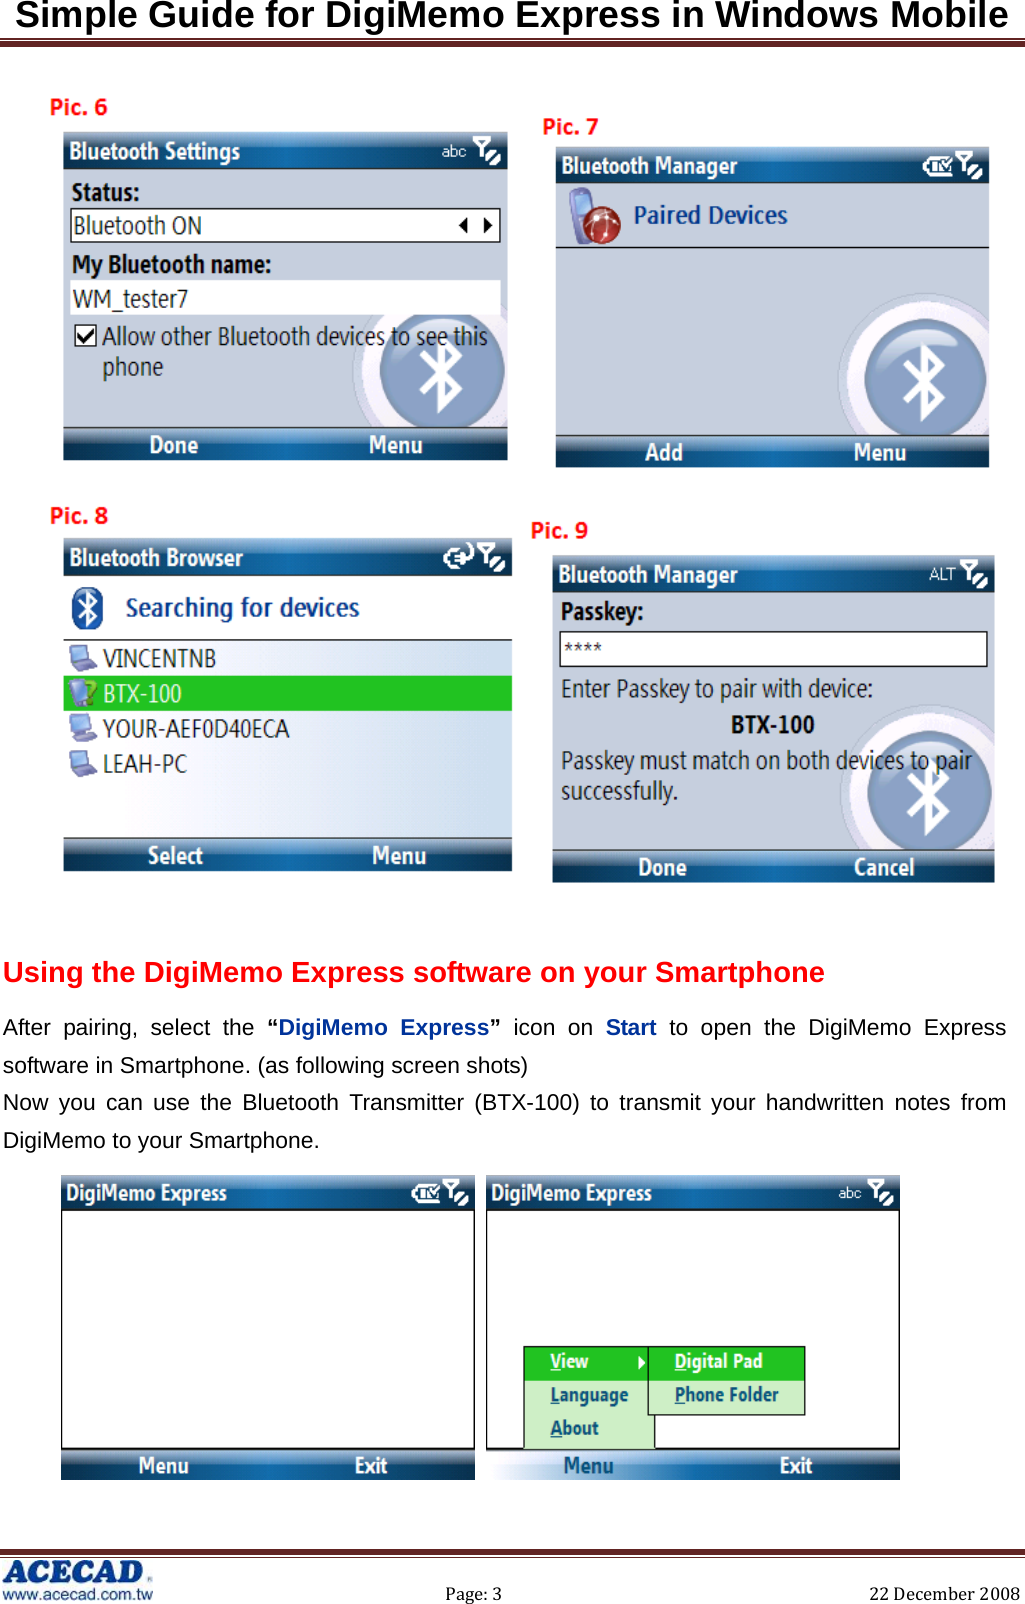 Simple Guide for DigiMemo Express in Windows Mobile  Page:3 22December2008     Using the DigiMemo Express software on your Smartphone After pairing, select the “DigiMemo Express” icon on Start  to open the DigiMemo Express software in Smartphone. (as following screen shots)   Now you can use the Bluetooth Transmitter (BTX-100) to transmit your handwritten notes from DigiMemo to your Smartphone.    